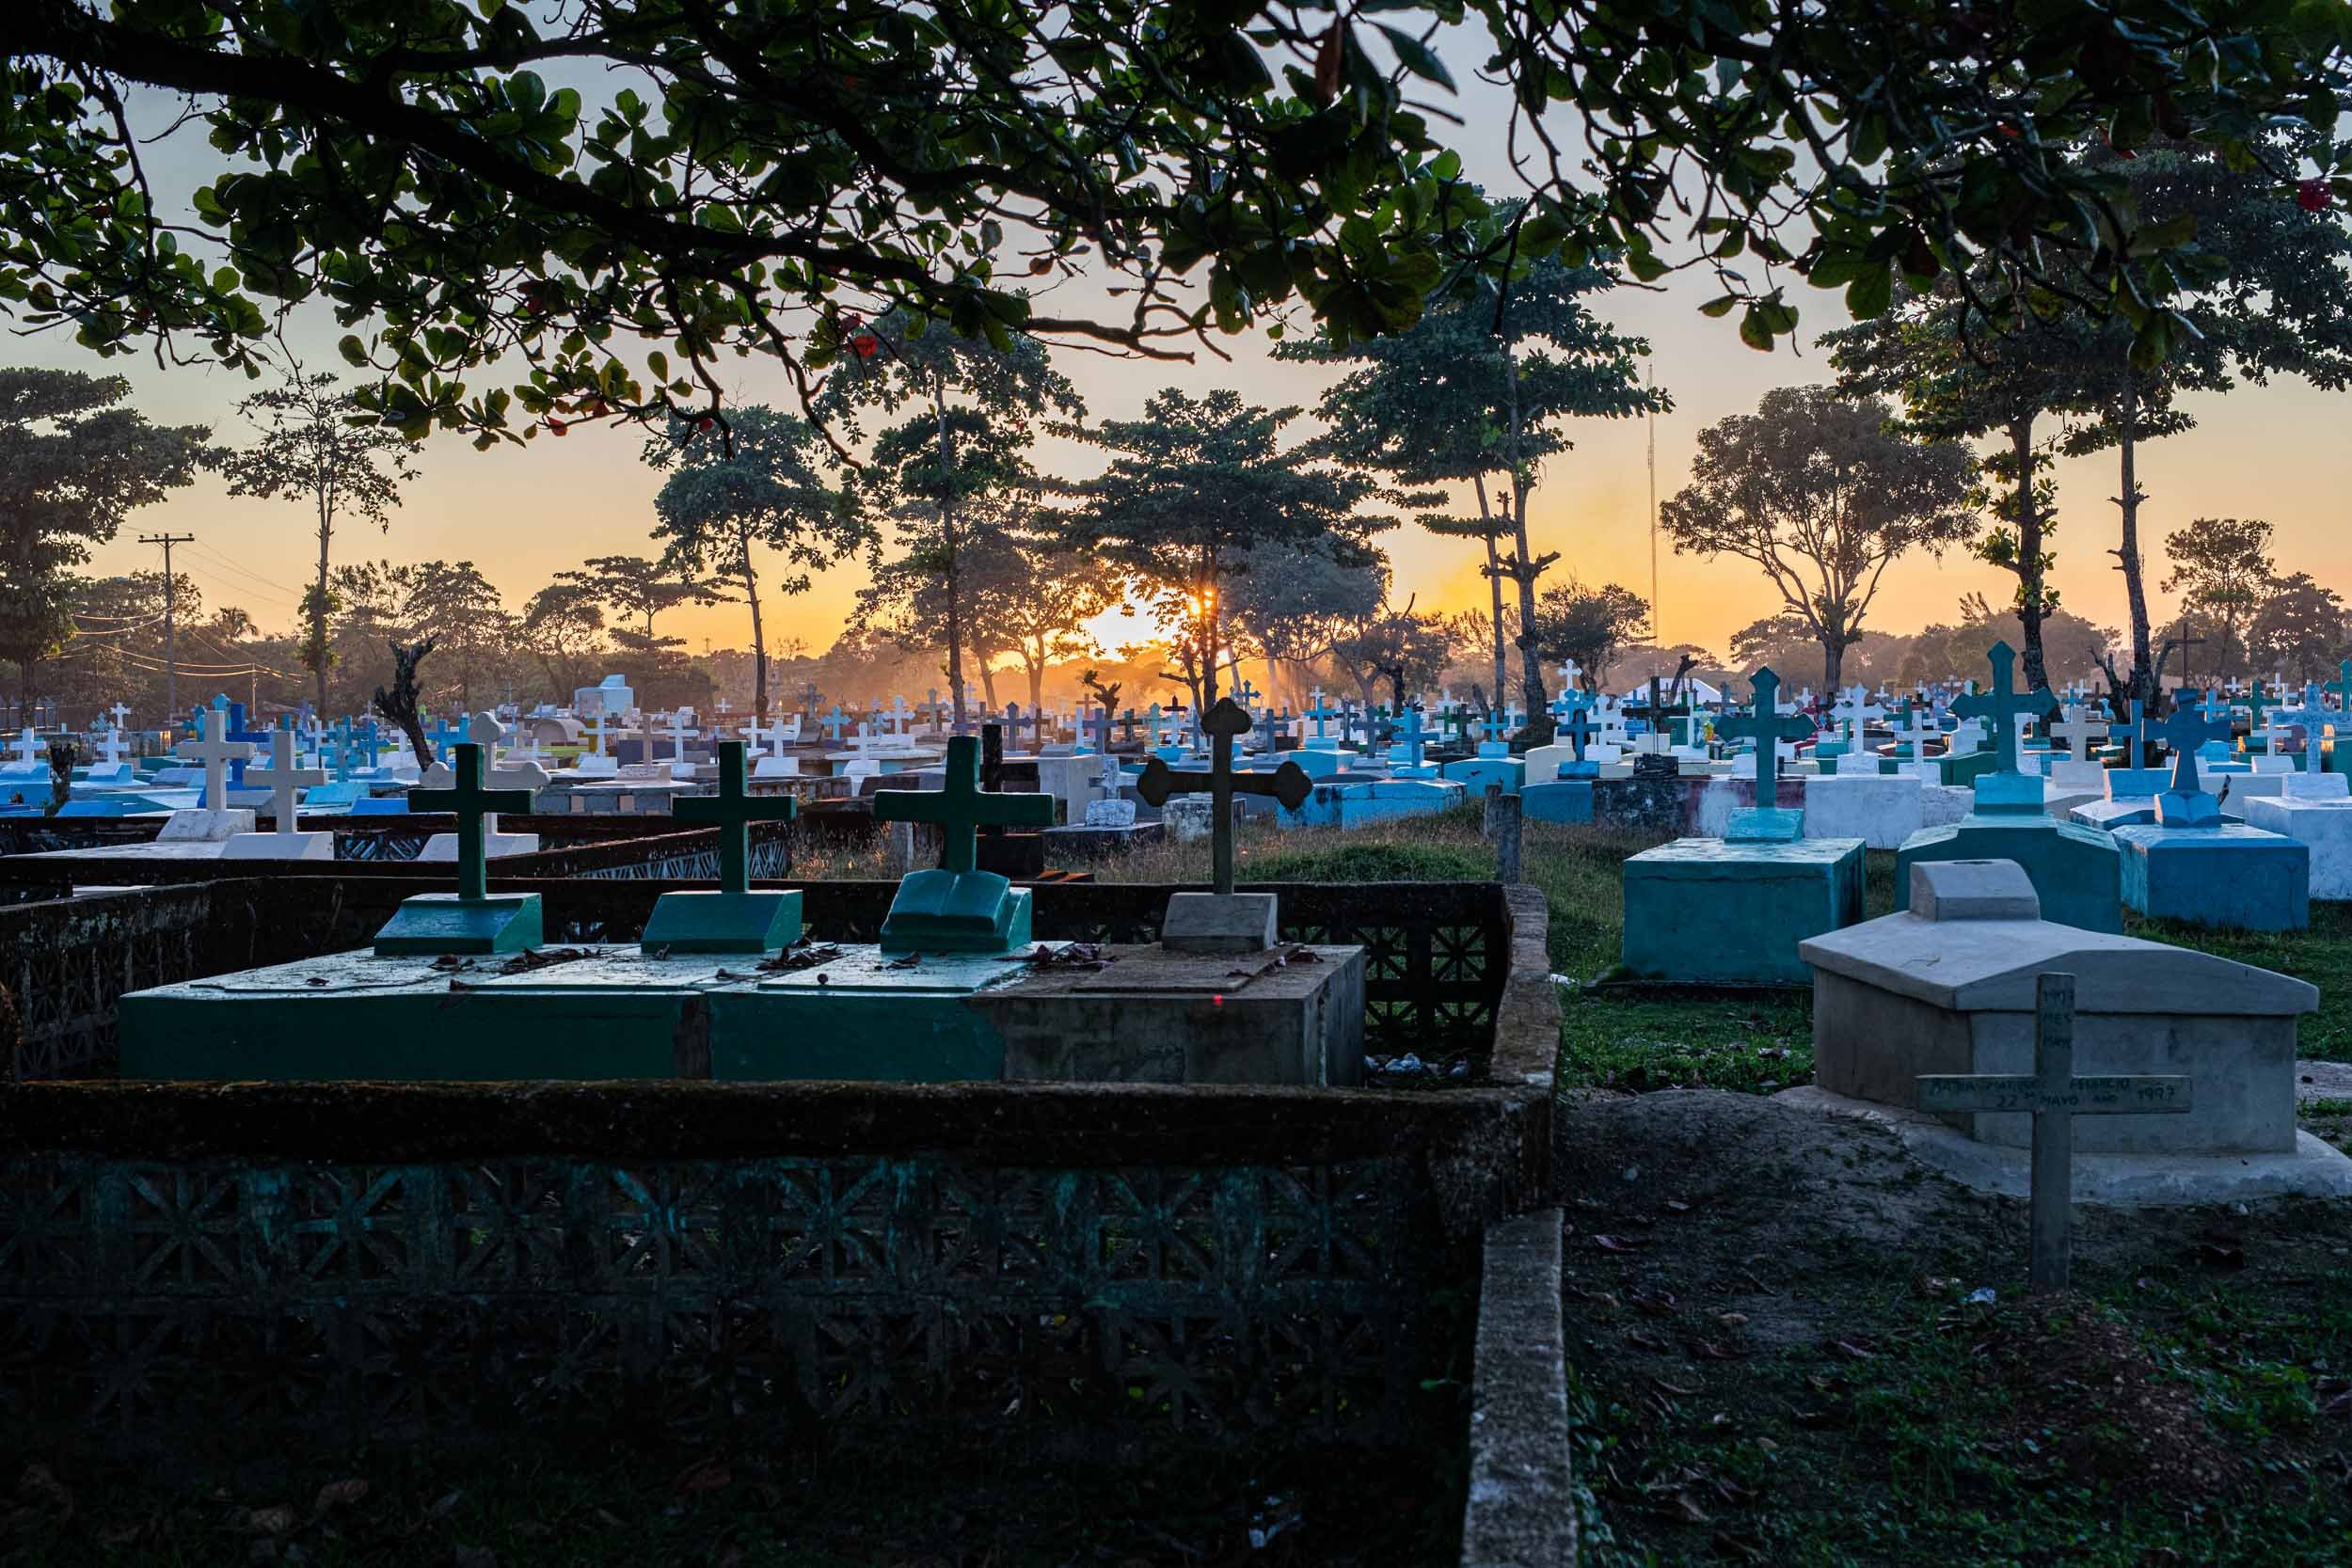  A cemetery in Puerto Cabezas where some divers who have died of work-related illness are buried. 